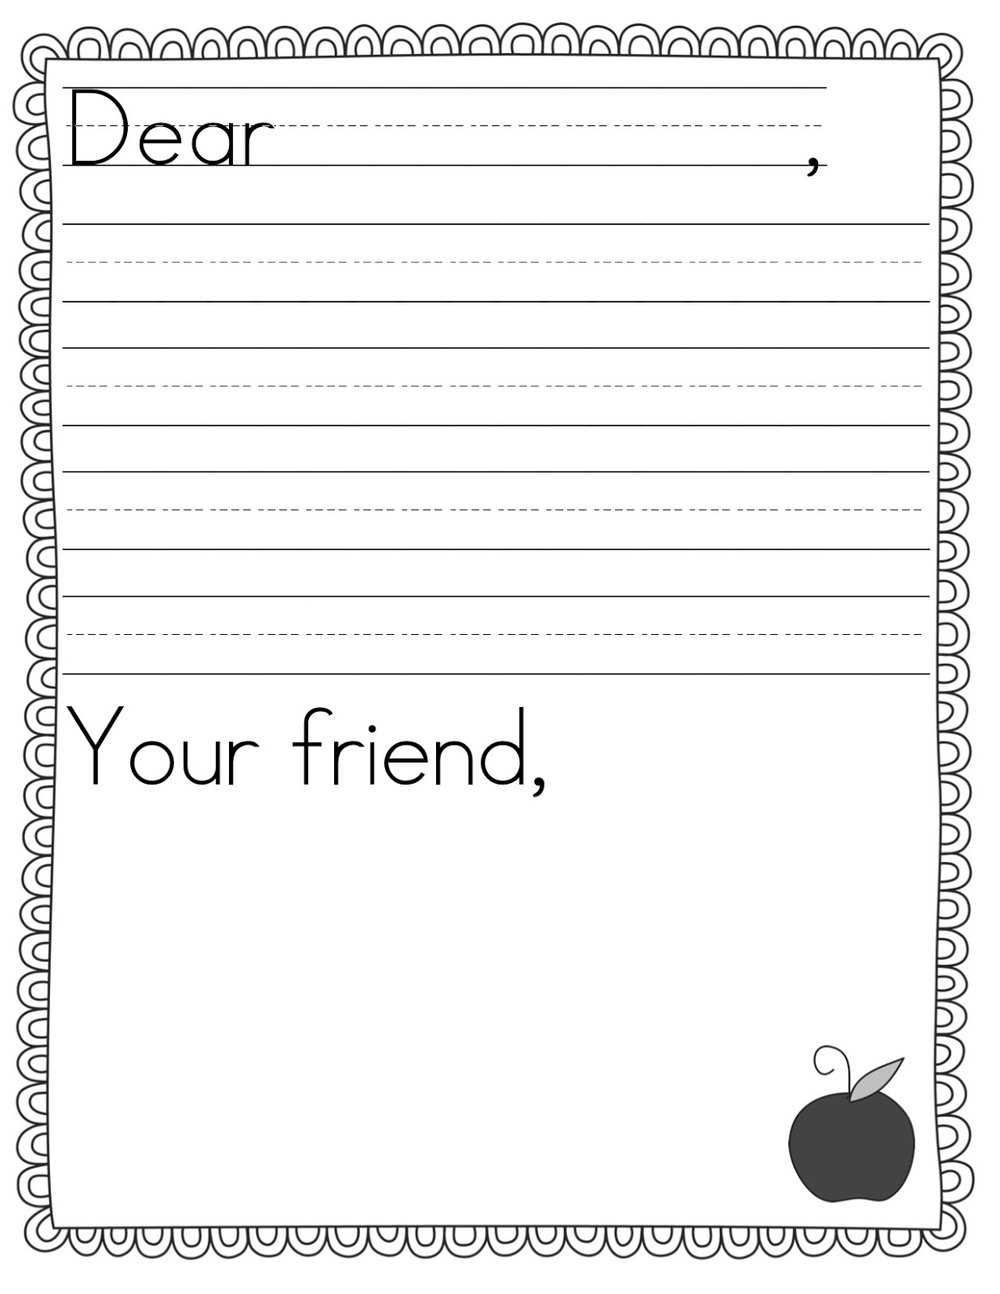 Kids Letter Writing Campaign — Urban Homestead Foundation Inside Blank Letter Writing Template For Kids